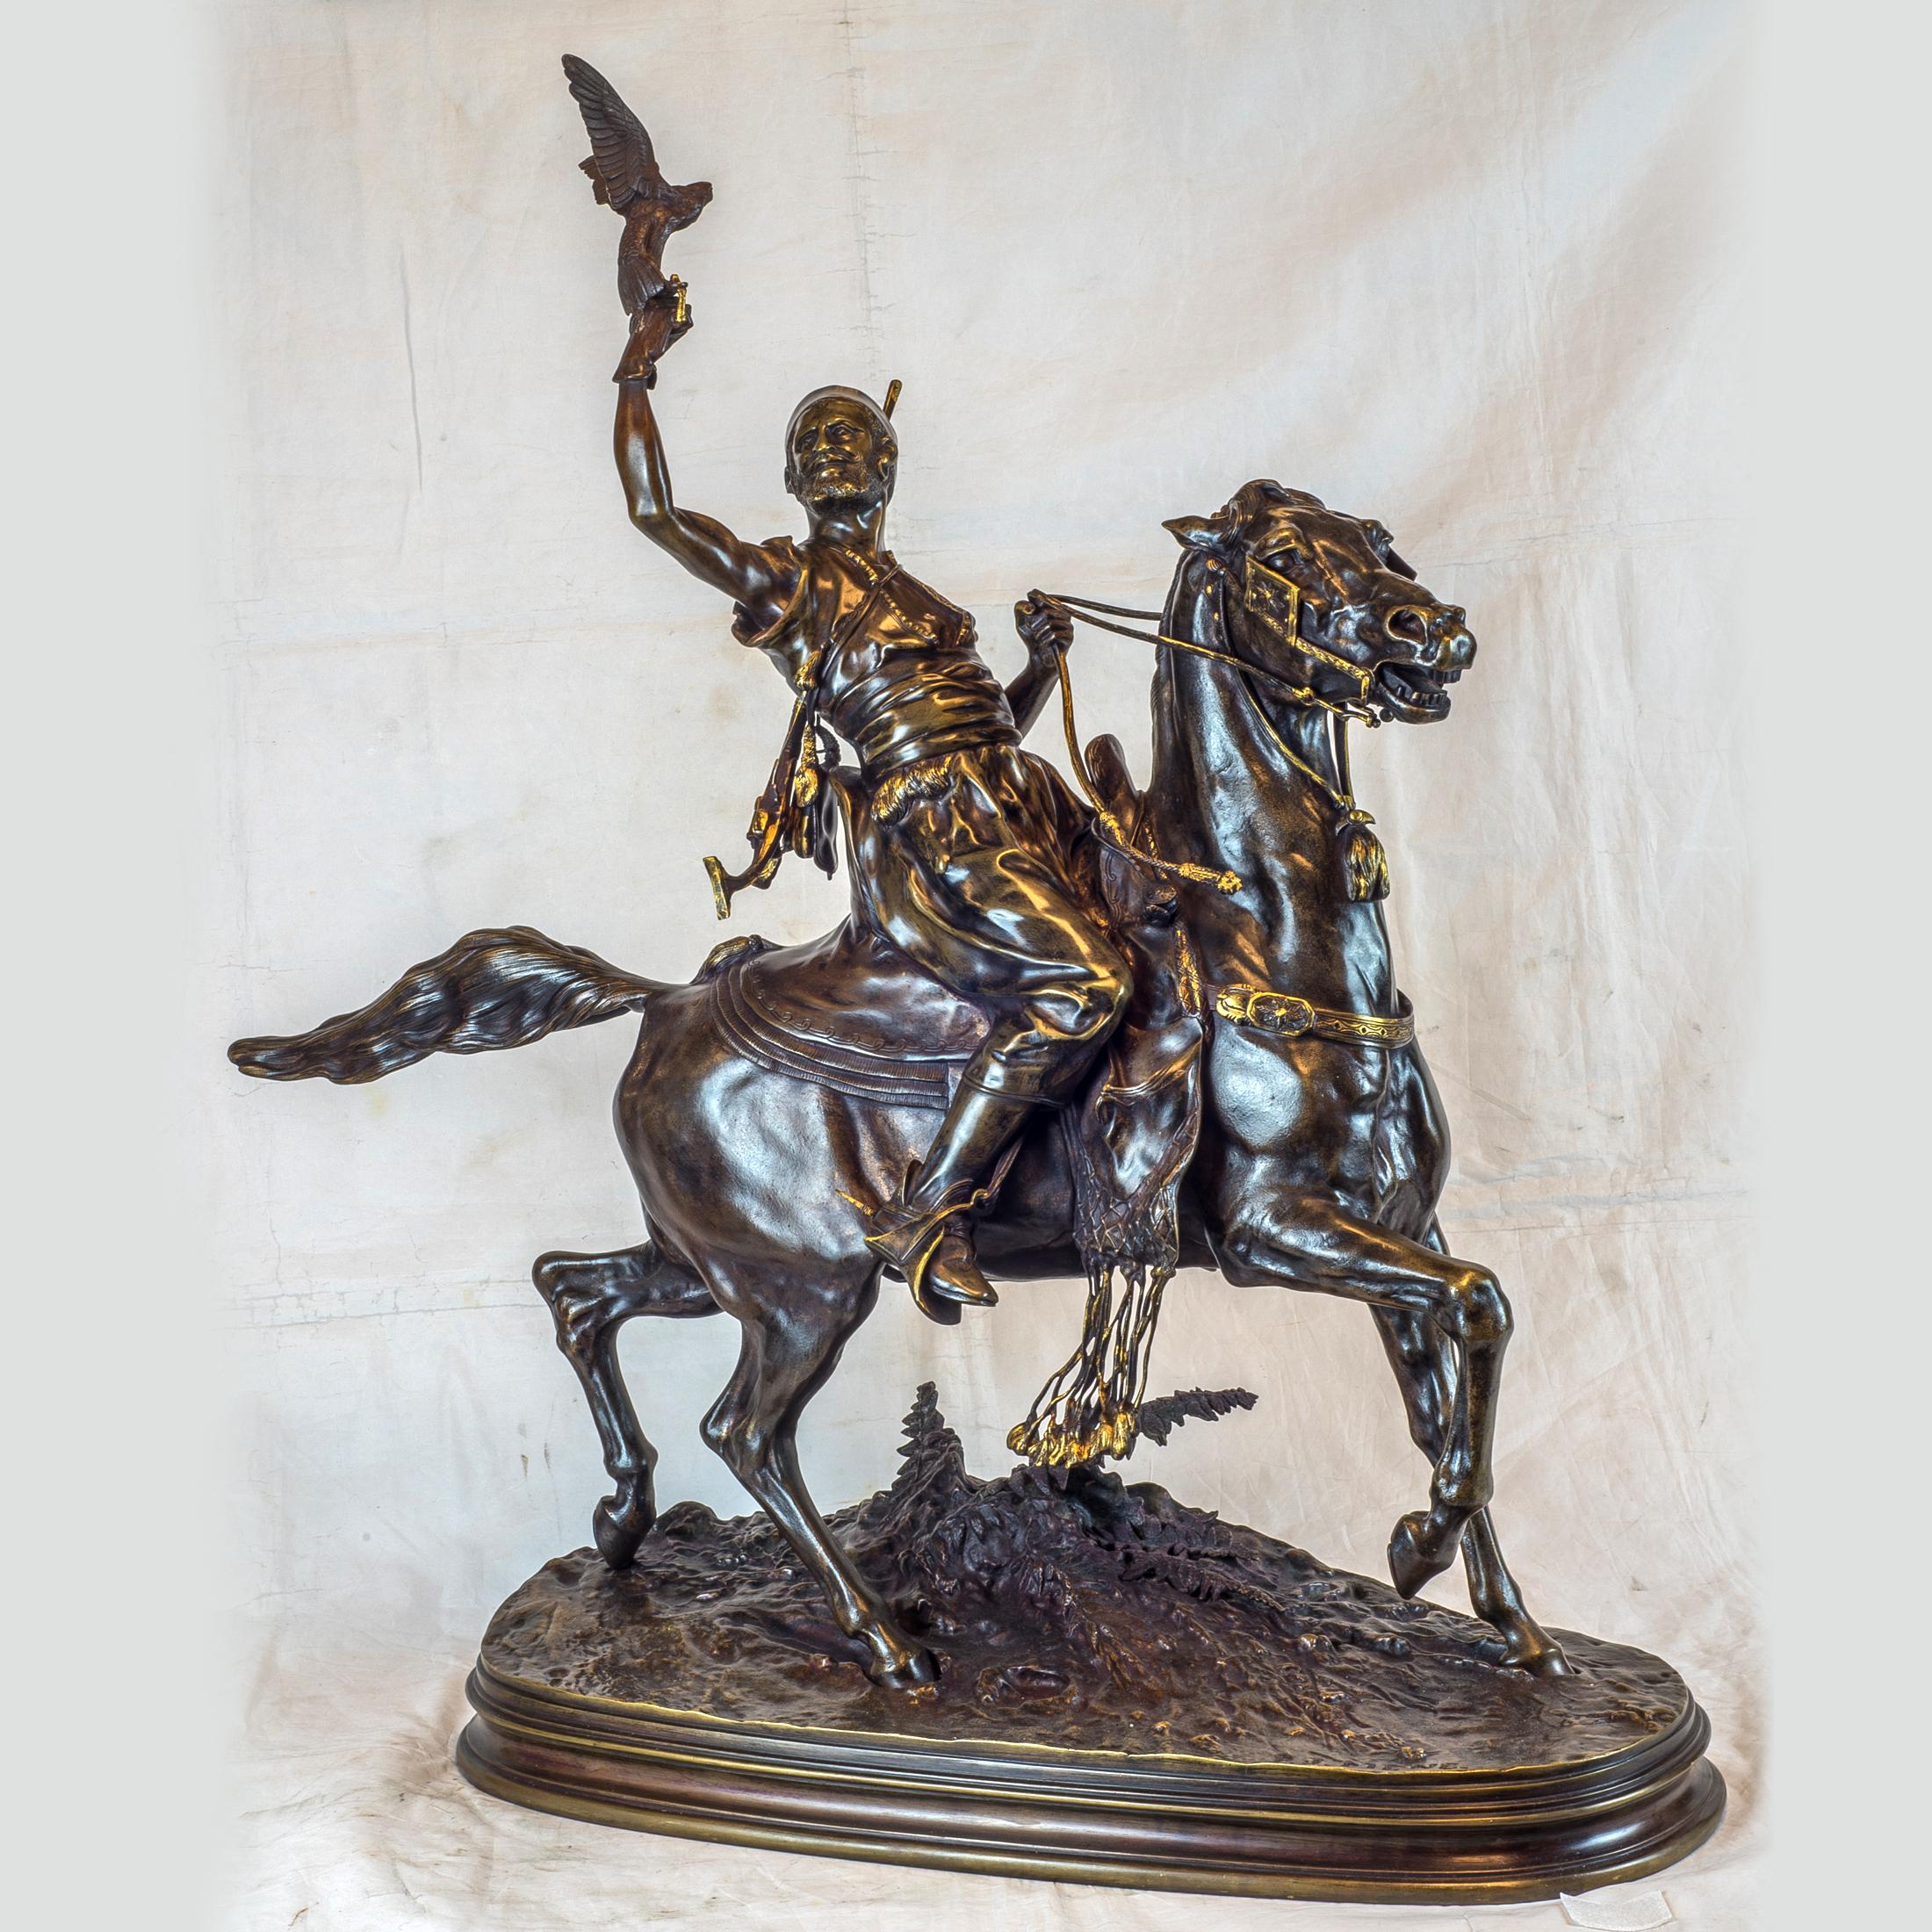 PIERRE JULES MÈNE    
French, (1810-1879)

Berber Horseman        

Patinated bronze signed ‘P.J. Mene’ on base
29 3/4 x 29 inches